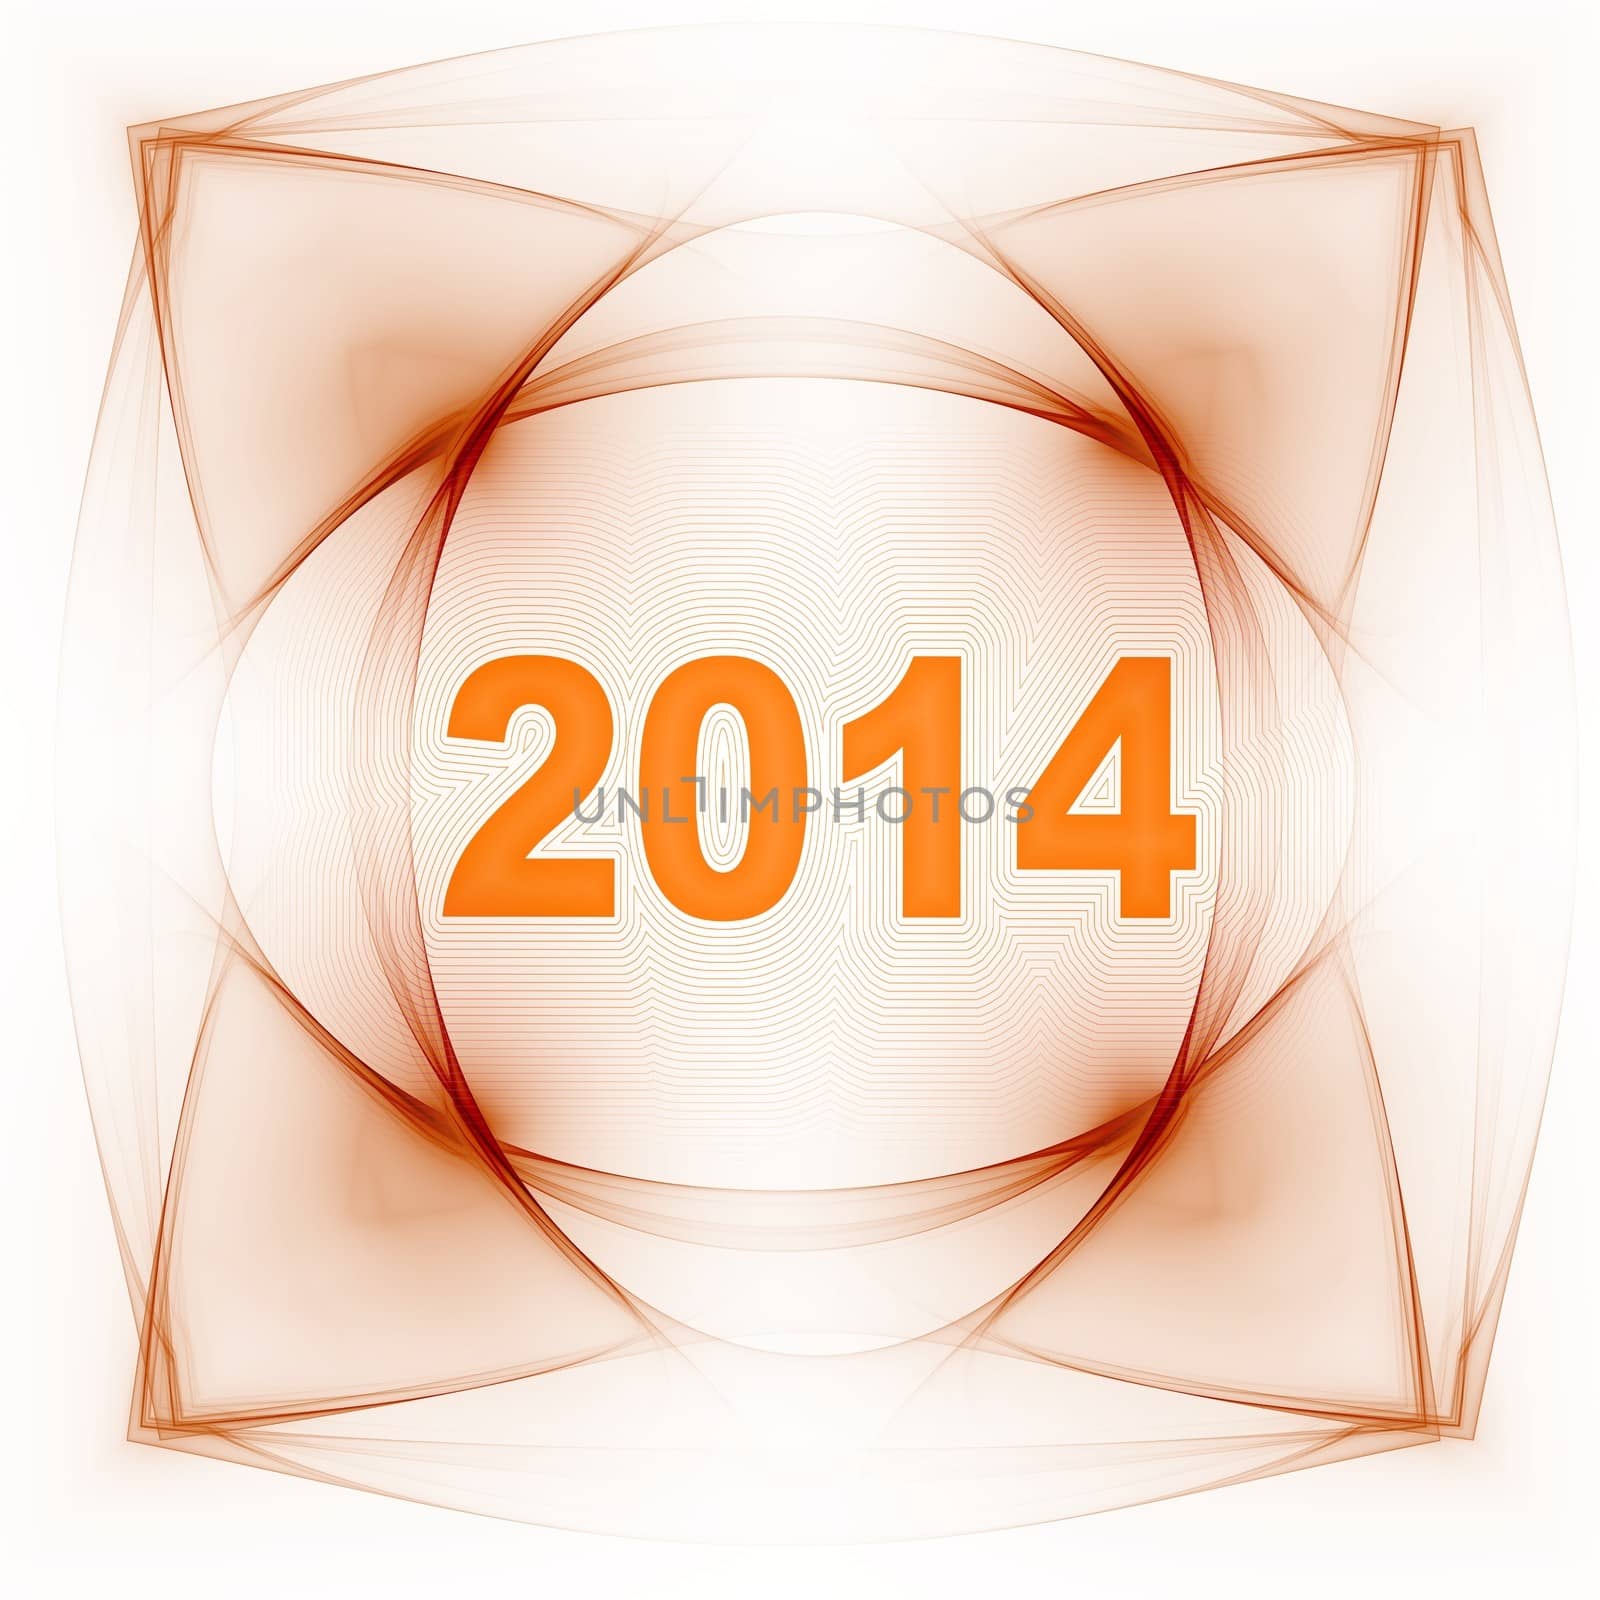  new year 2014 design  by lkant